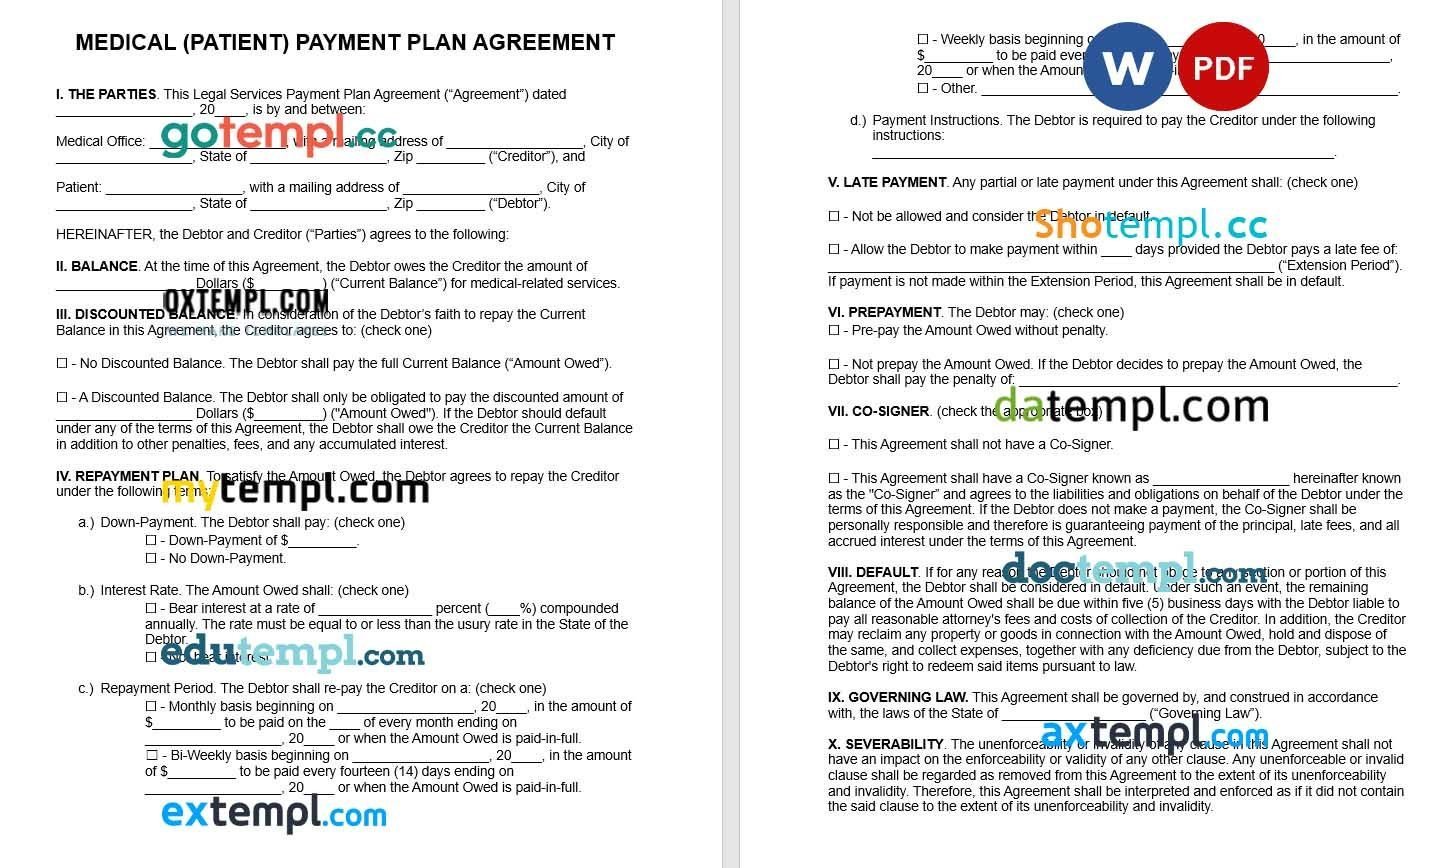 Medical Patient Payment Plan Agreement Word example, fully editable